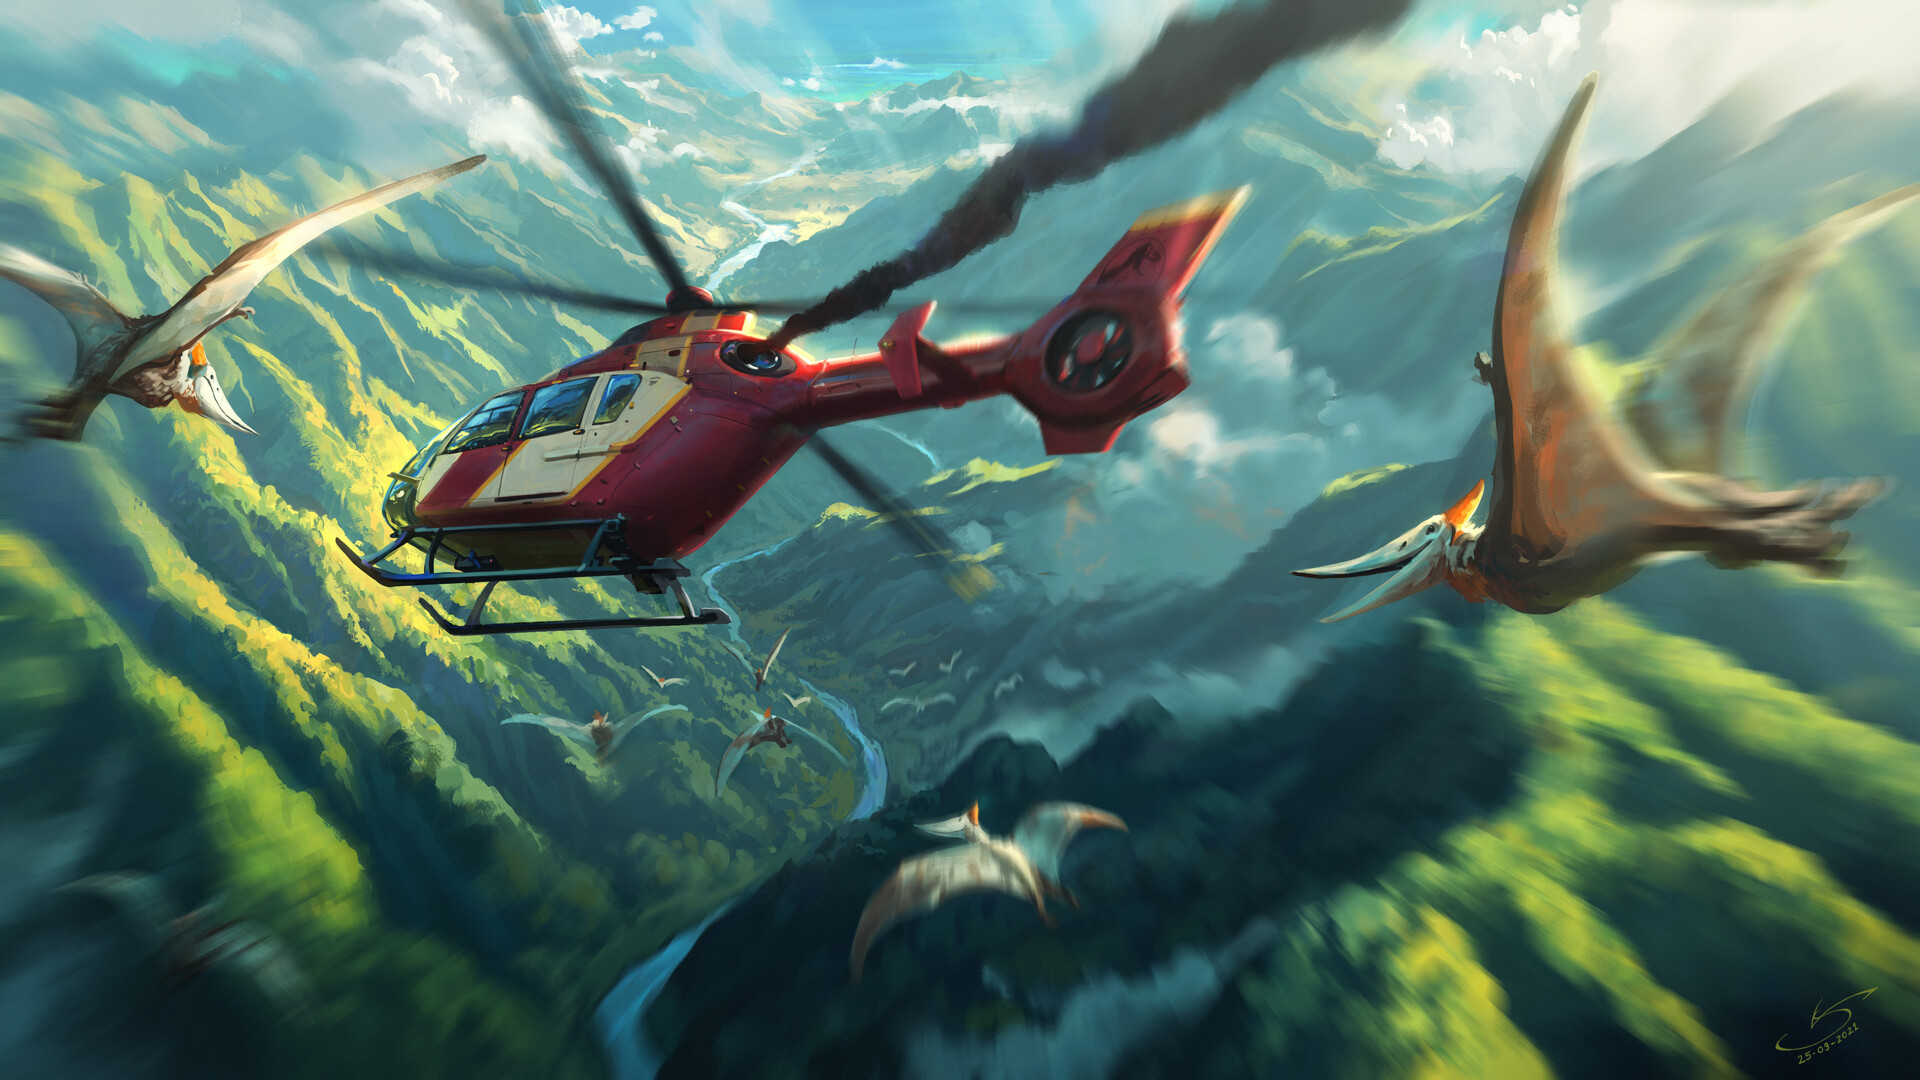 General 1920x1080 helicopters Jurassic World dinosaurs Pterodactyl river valley mountains artwork